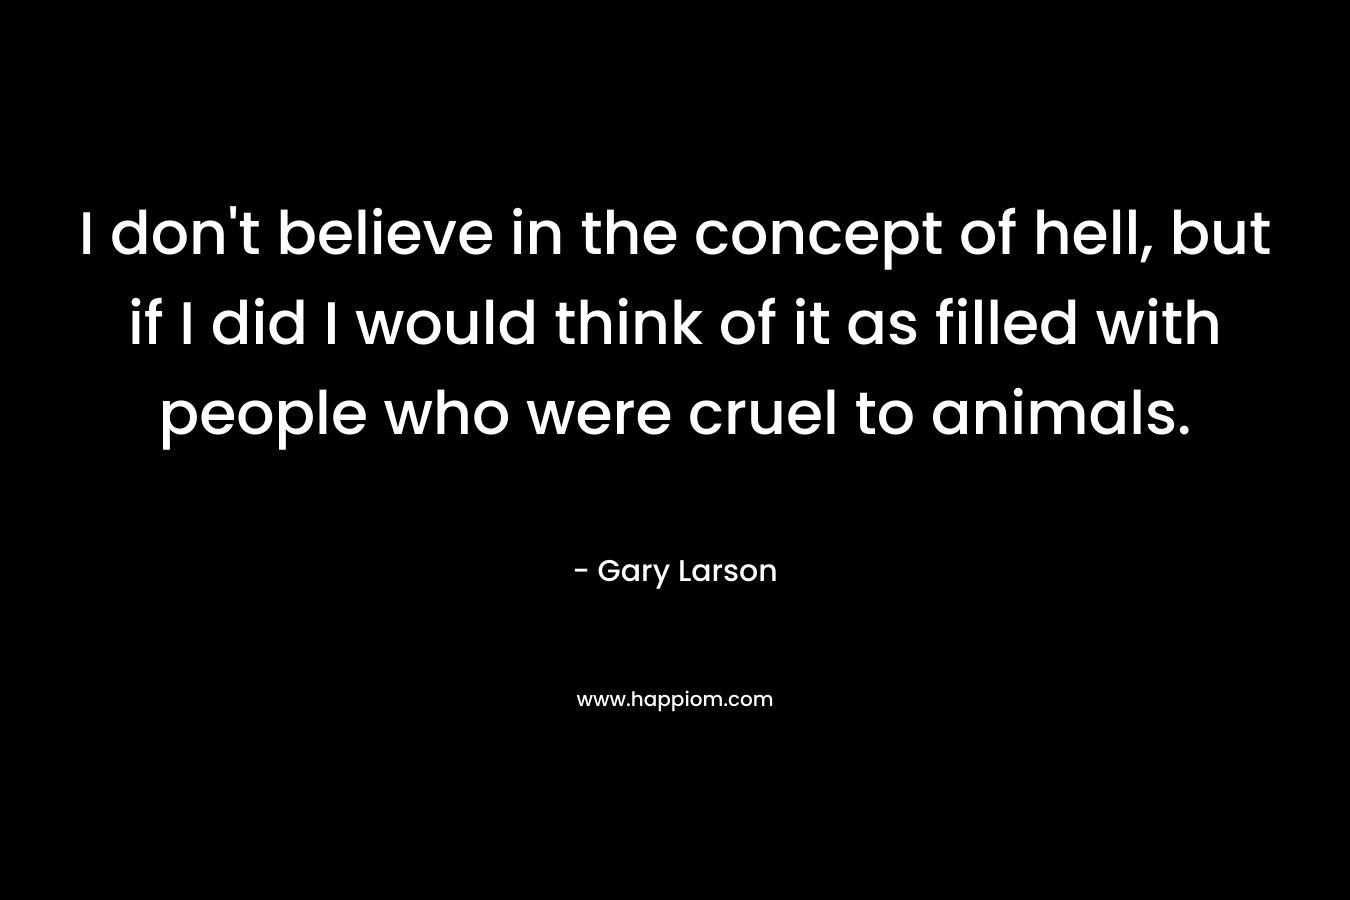 I don’t believe in the concept of hell, but if I did I would think of it as filled with people who were cruel to animals. – Gary Larson